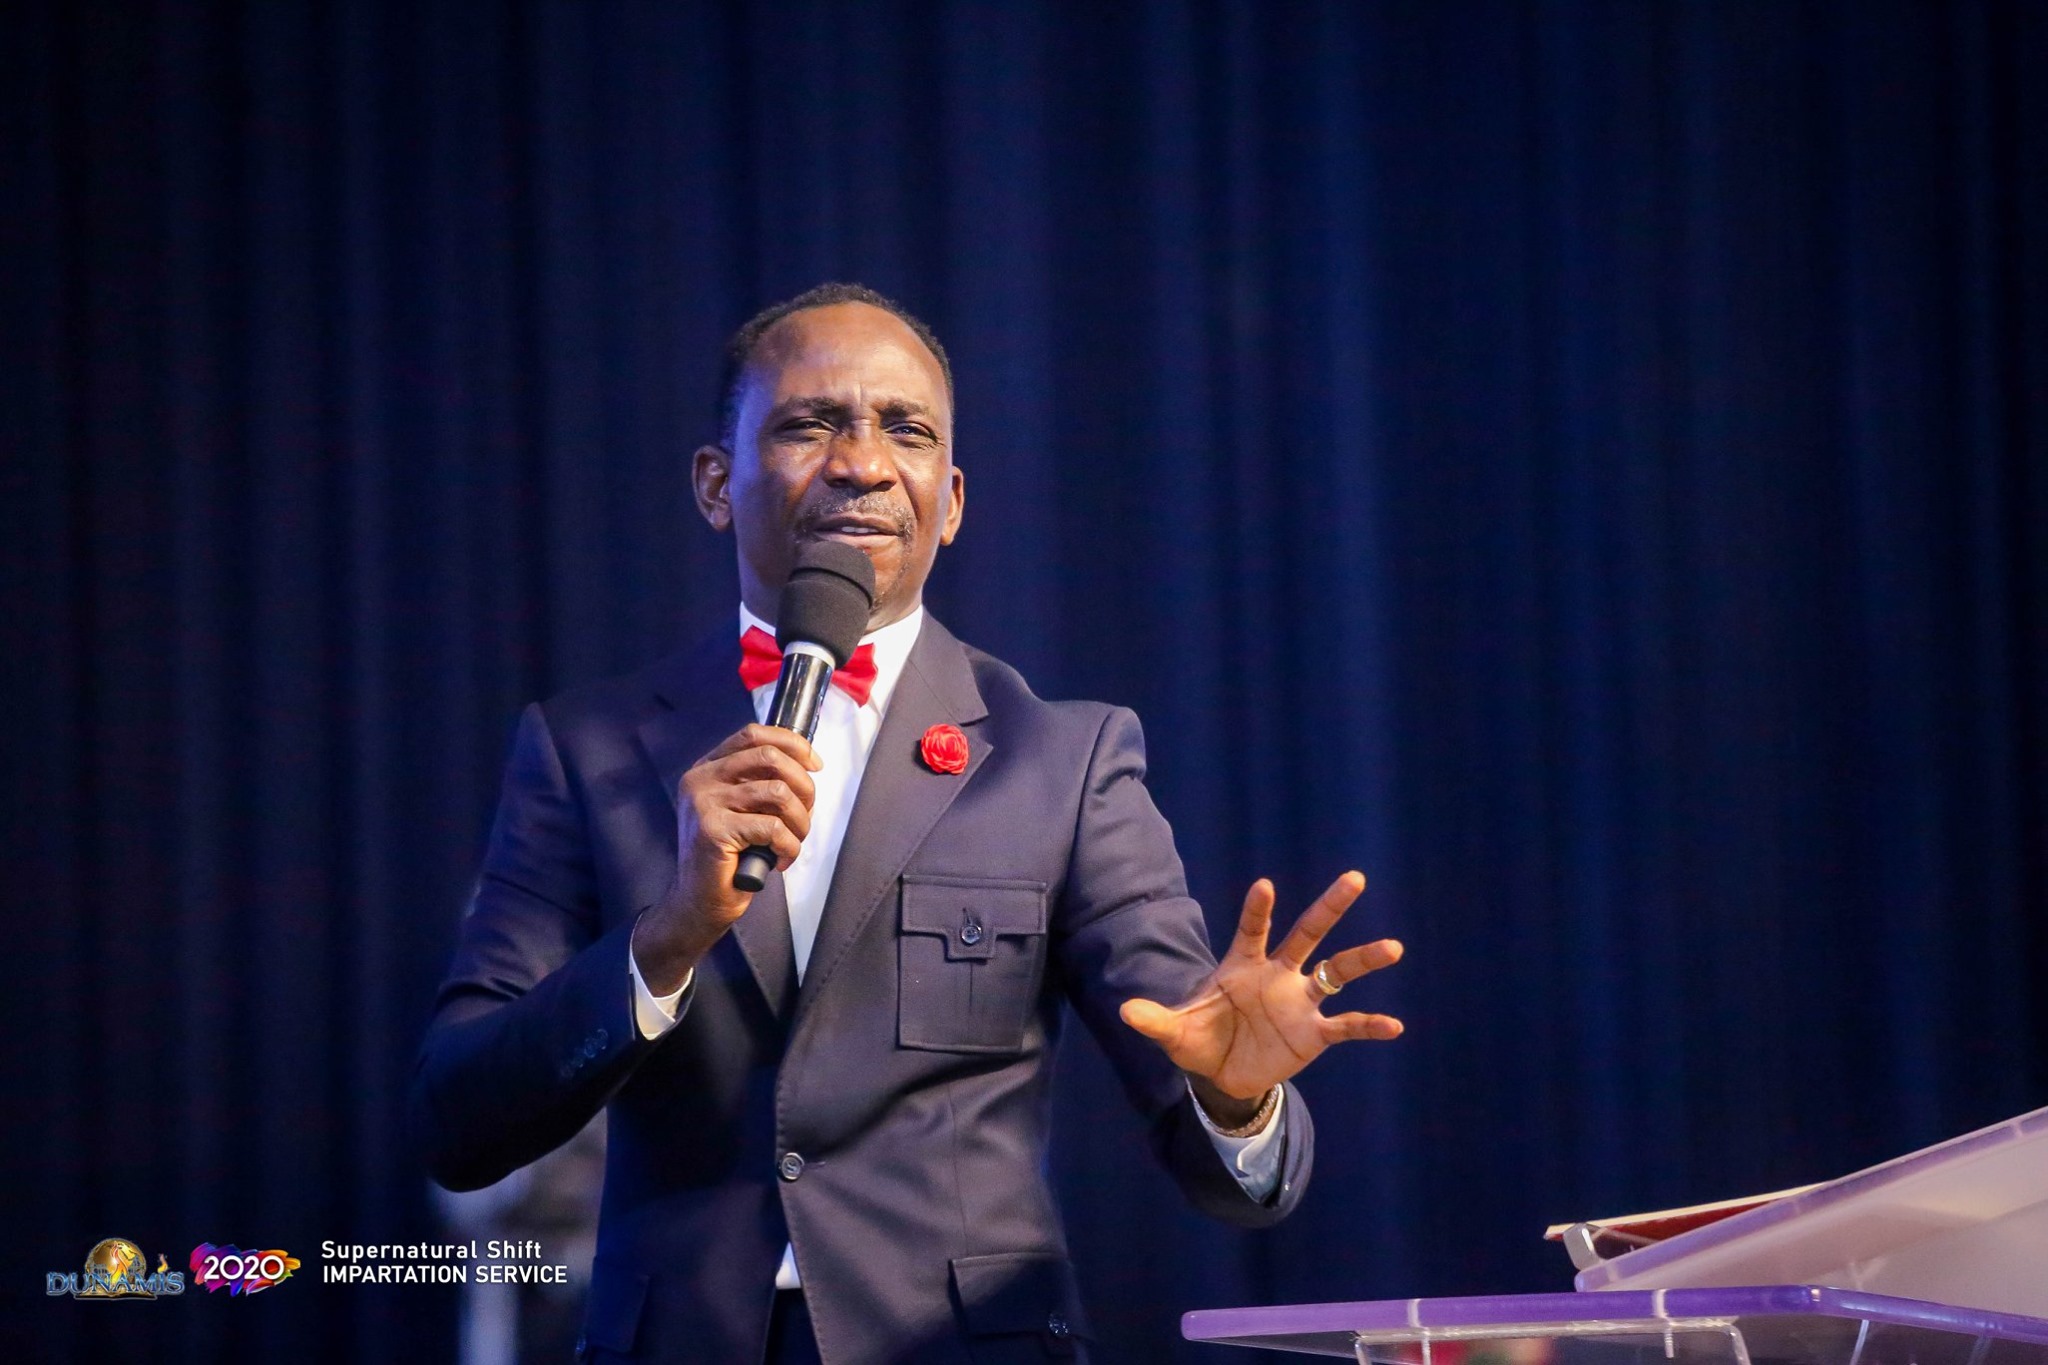 Hope AnHope And Faith mp3 by - Dr. Pastor Paul Enenched Faith by - Dr. Pastor Paul Enenche